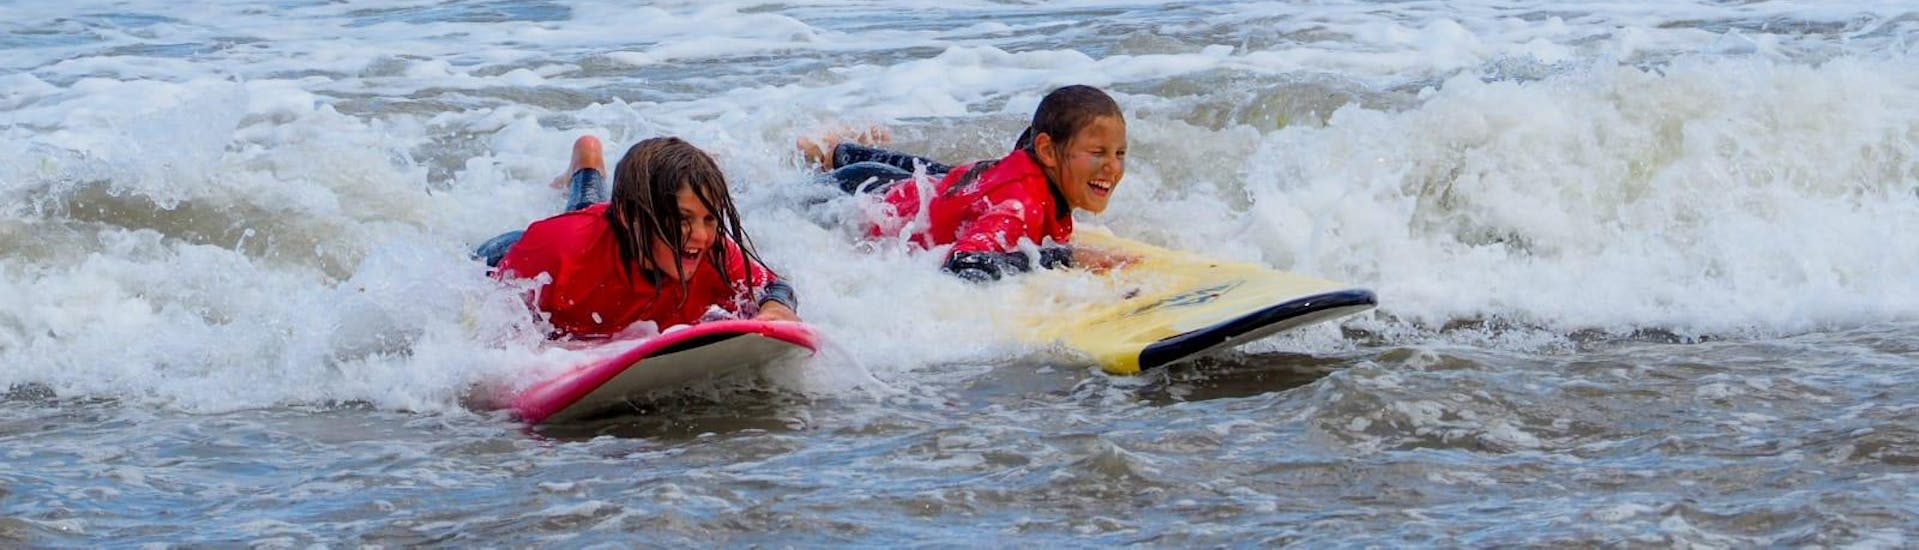 Two children visibly have fun in the water during their Private Surfing Lessons at Playa Grande de Bastiagueiro, organized by Prado Surf.